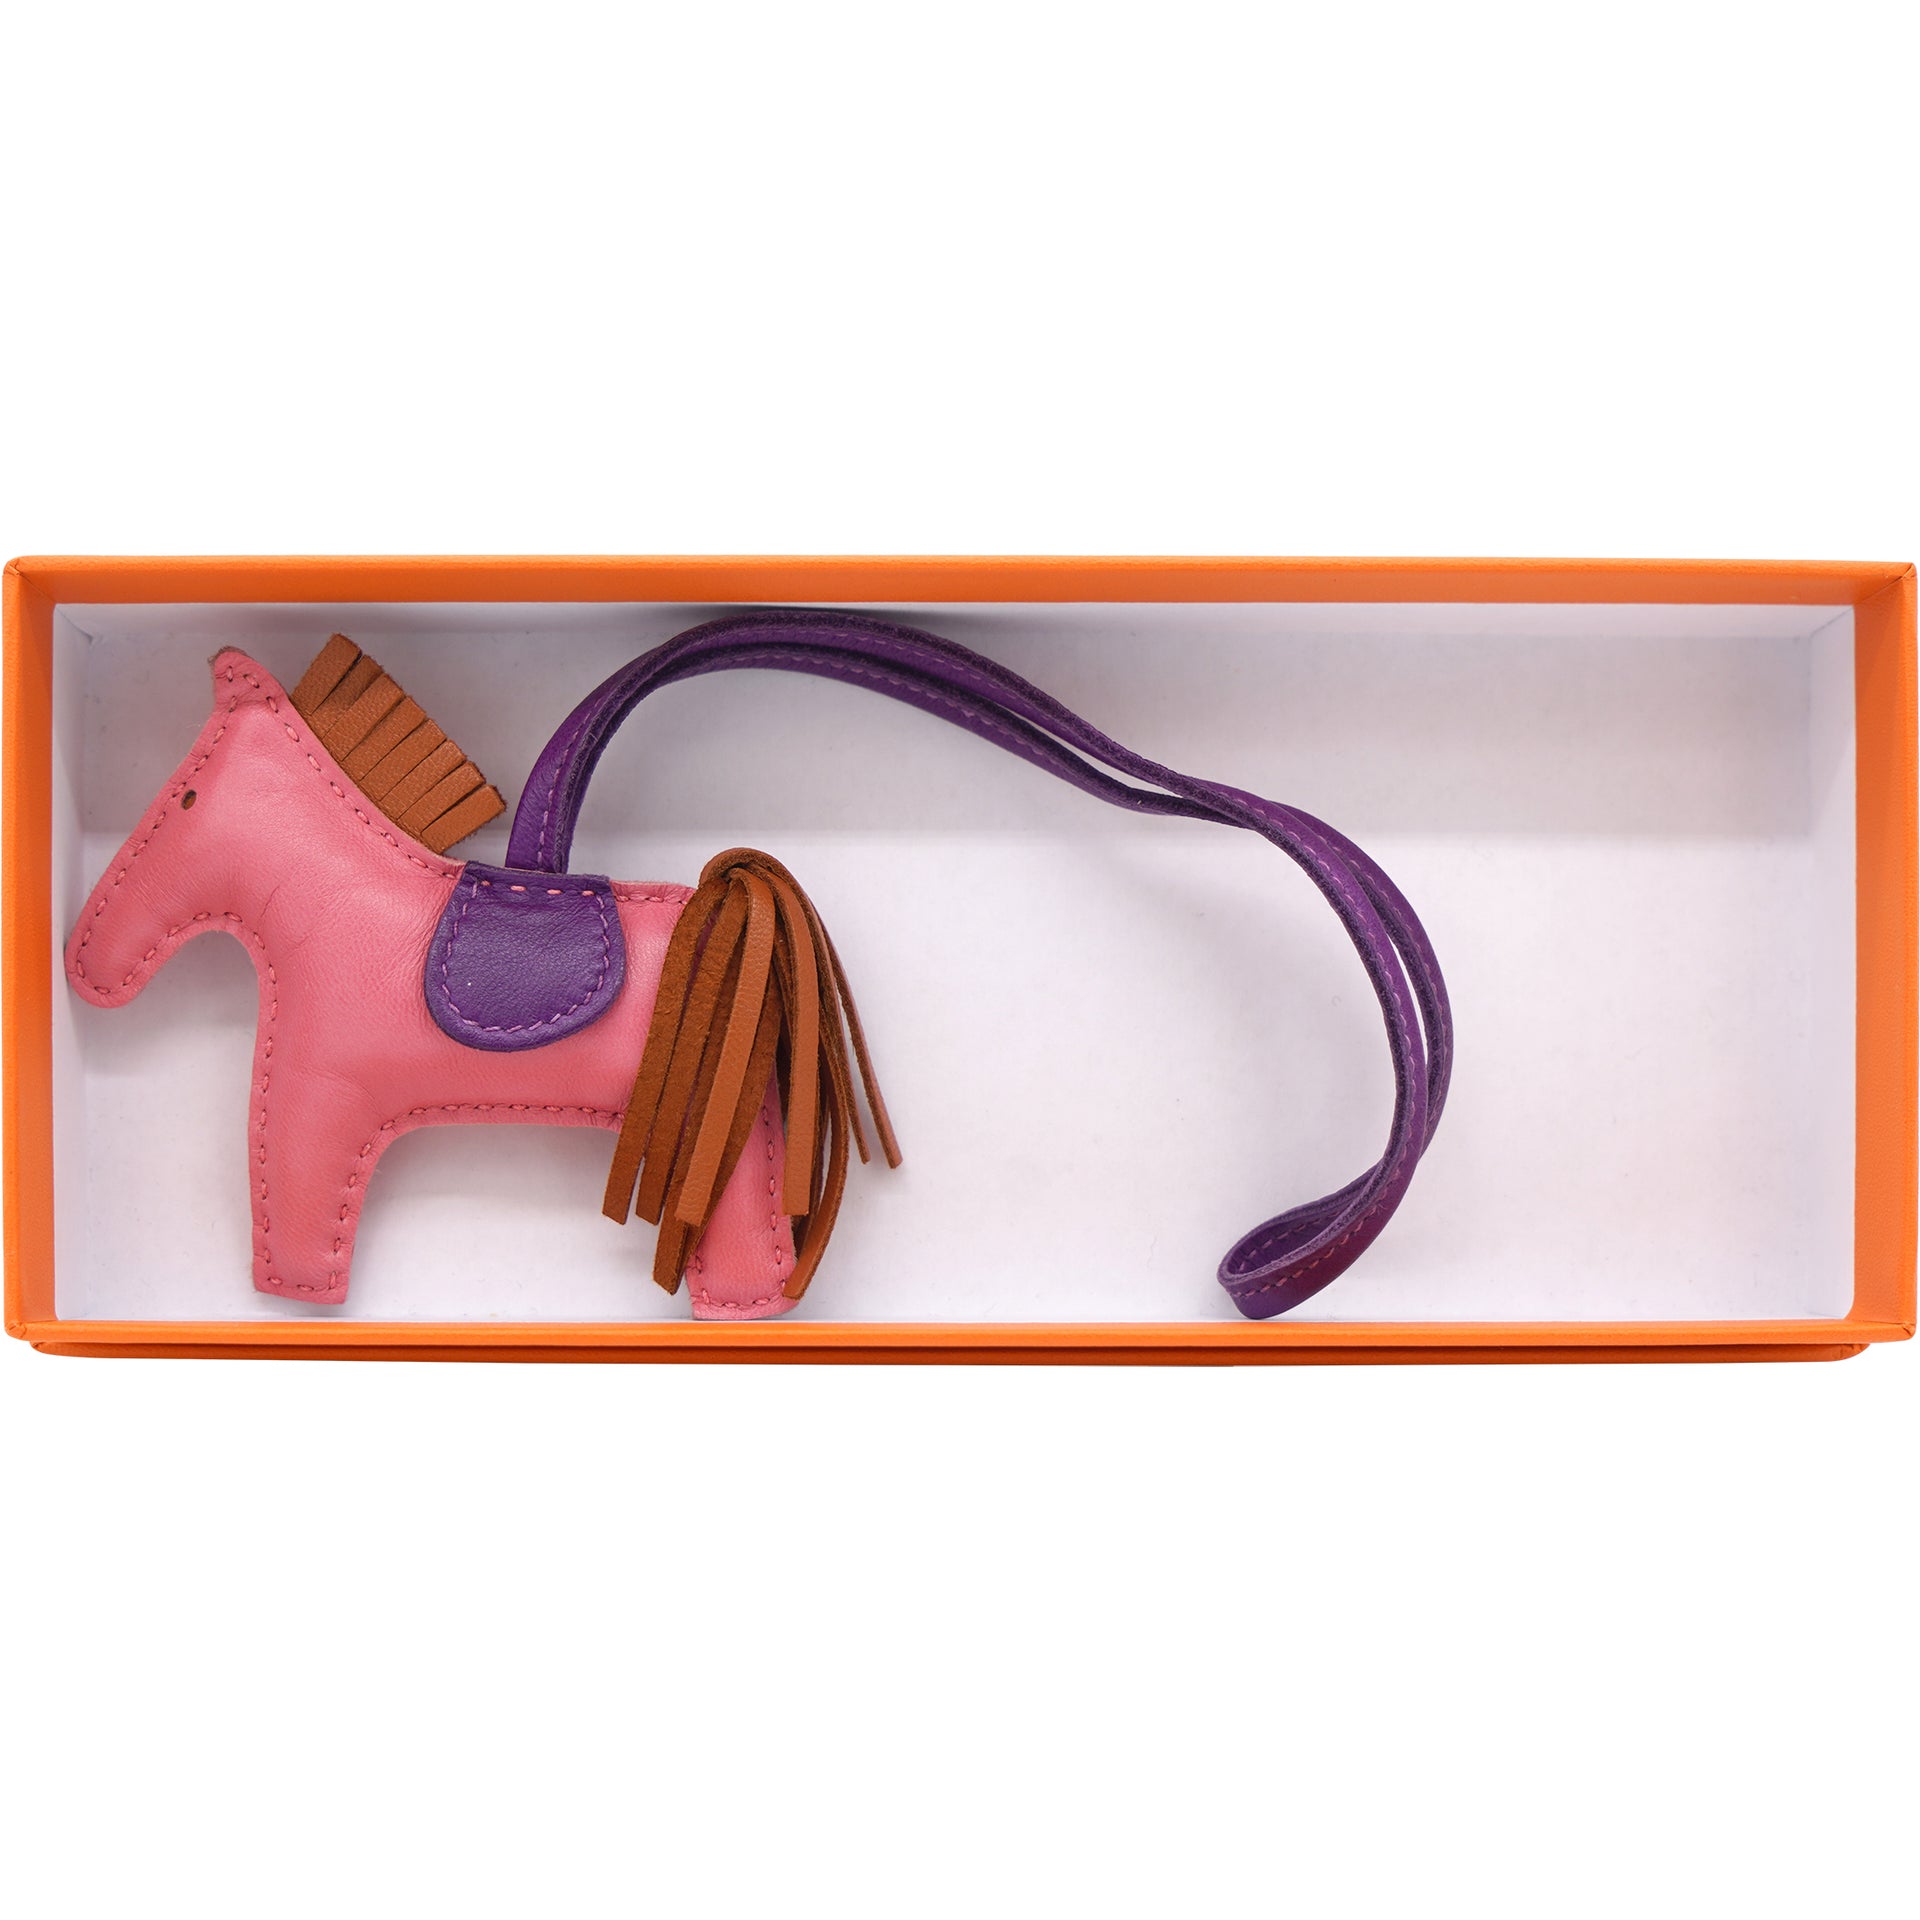 HERMES Horse Rodeo PM Bag accessories Bag Charm Lambskin Leather purple